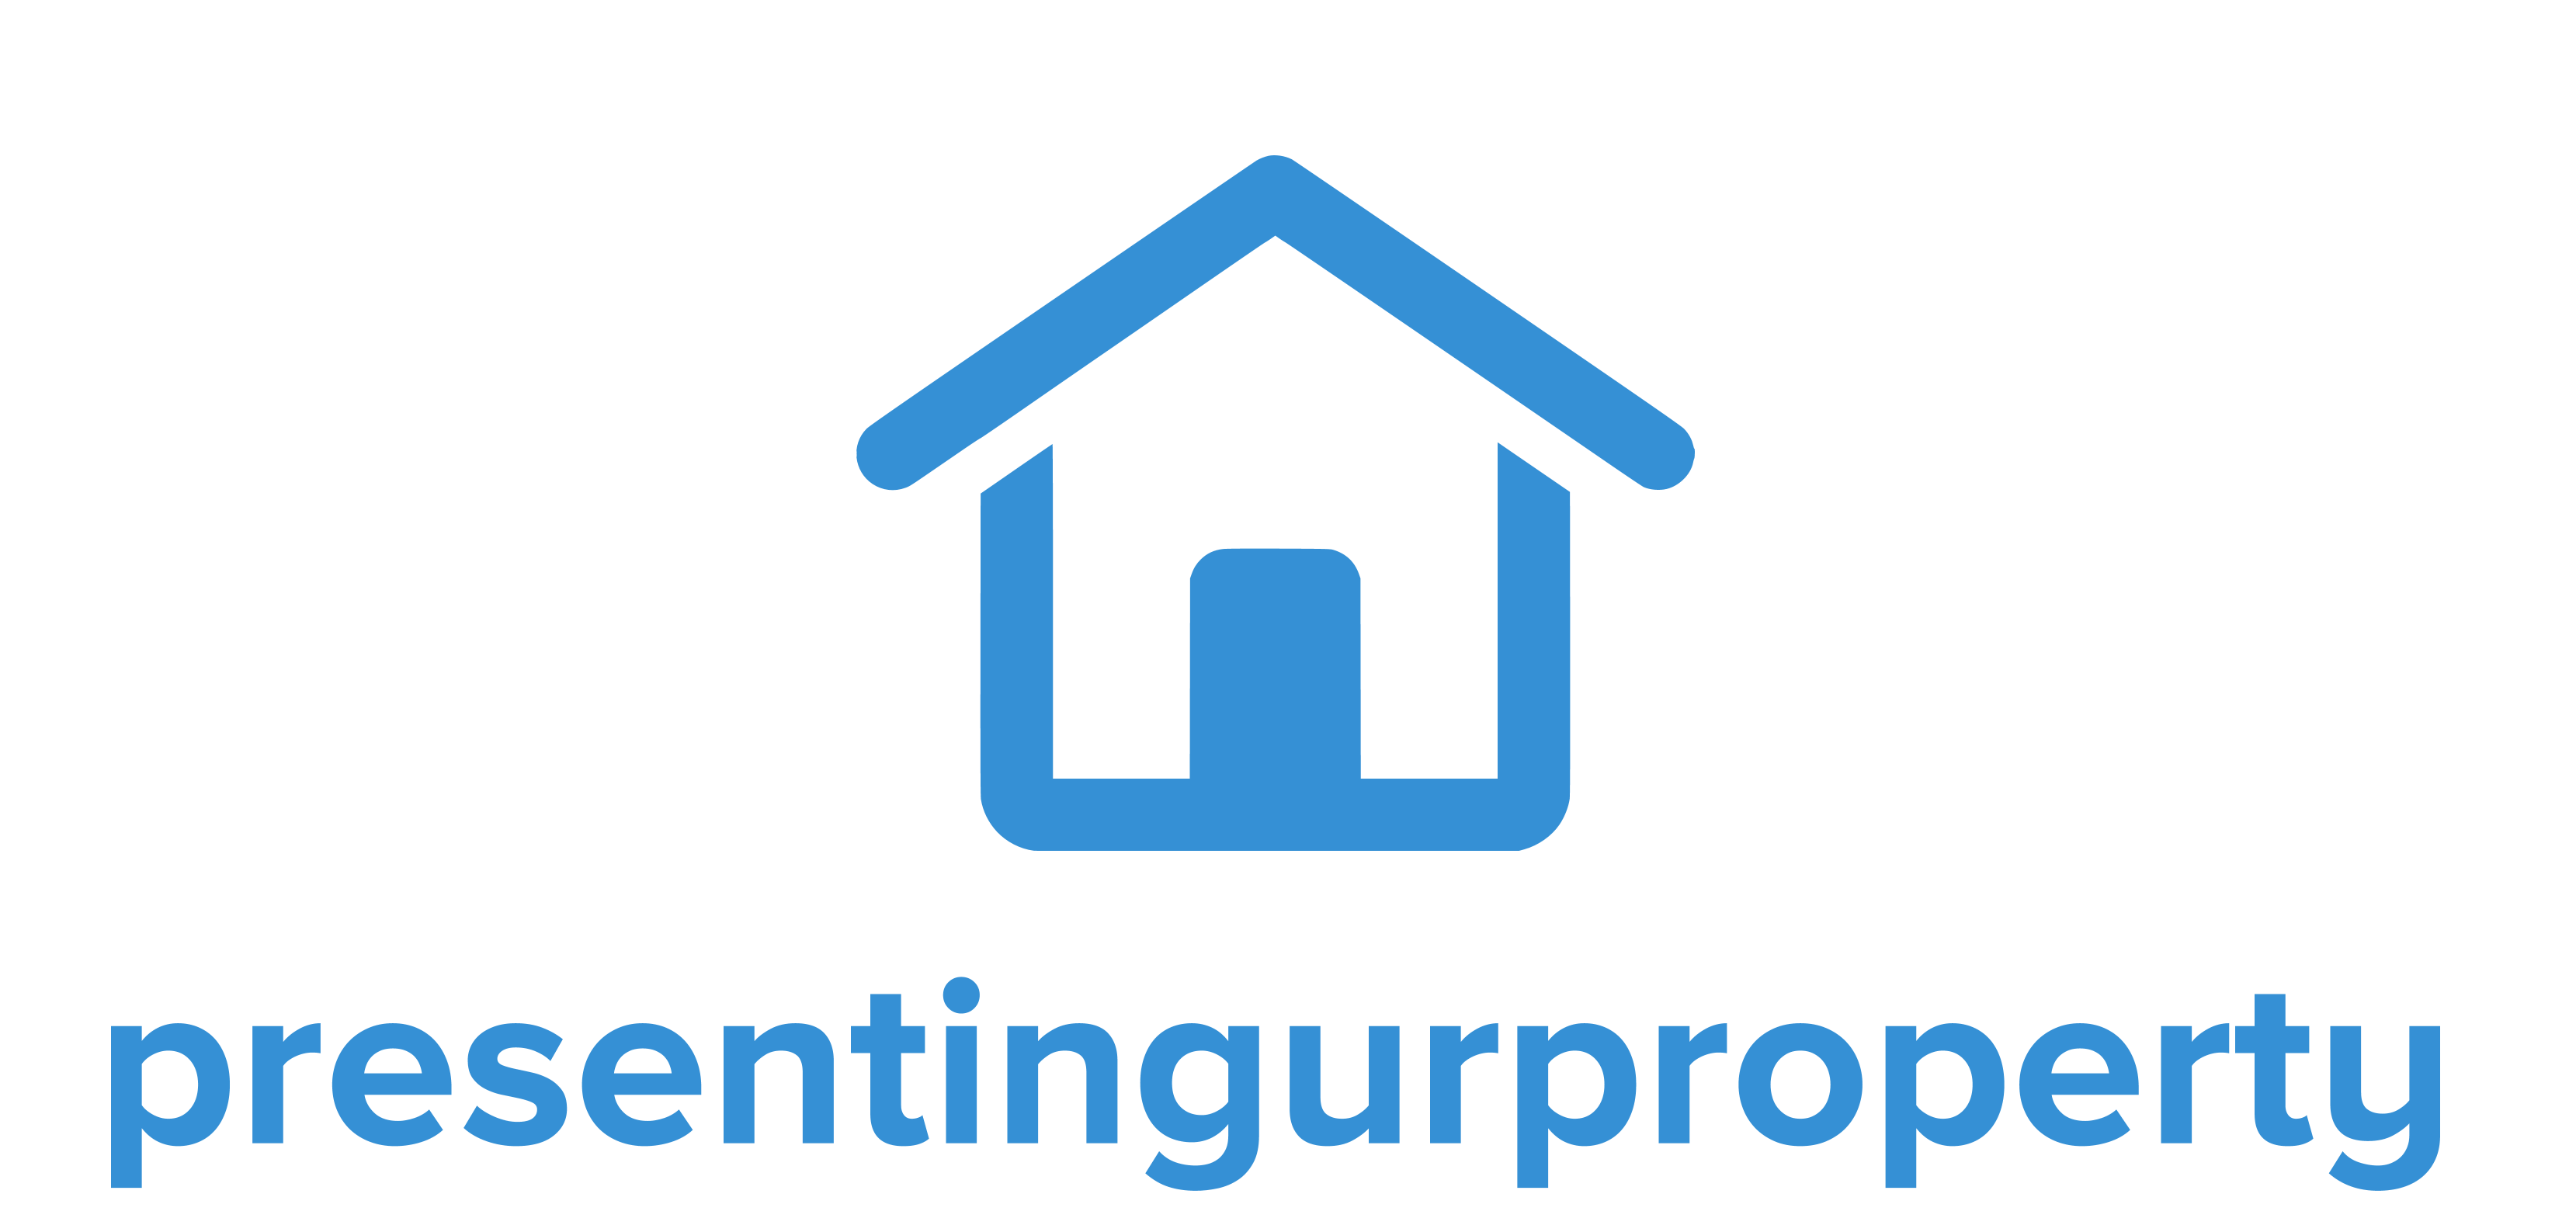 The presenting your property logo